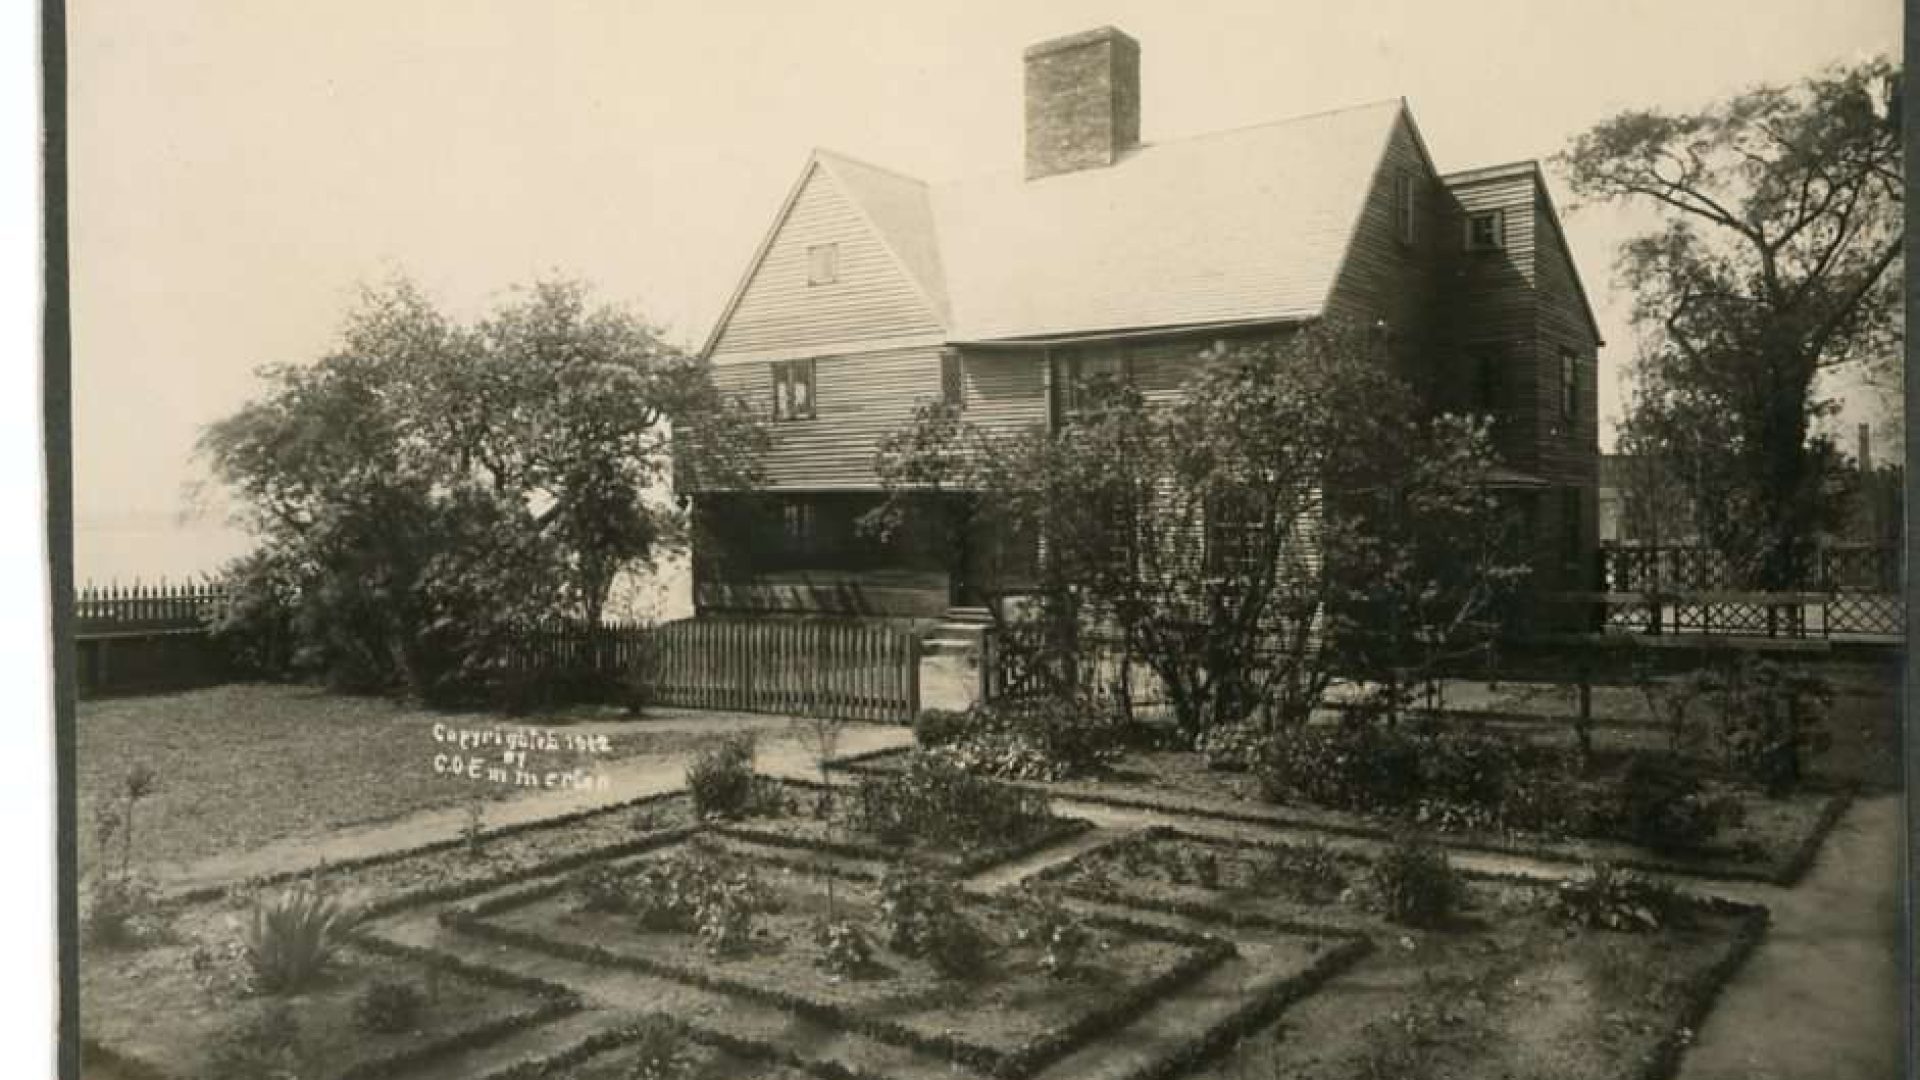 A black and white photograph of a house with peaked roof and a knot-patterned garden.